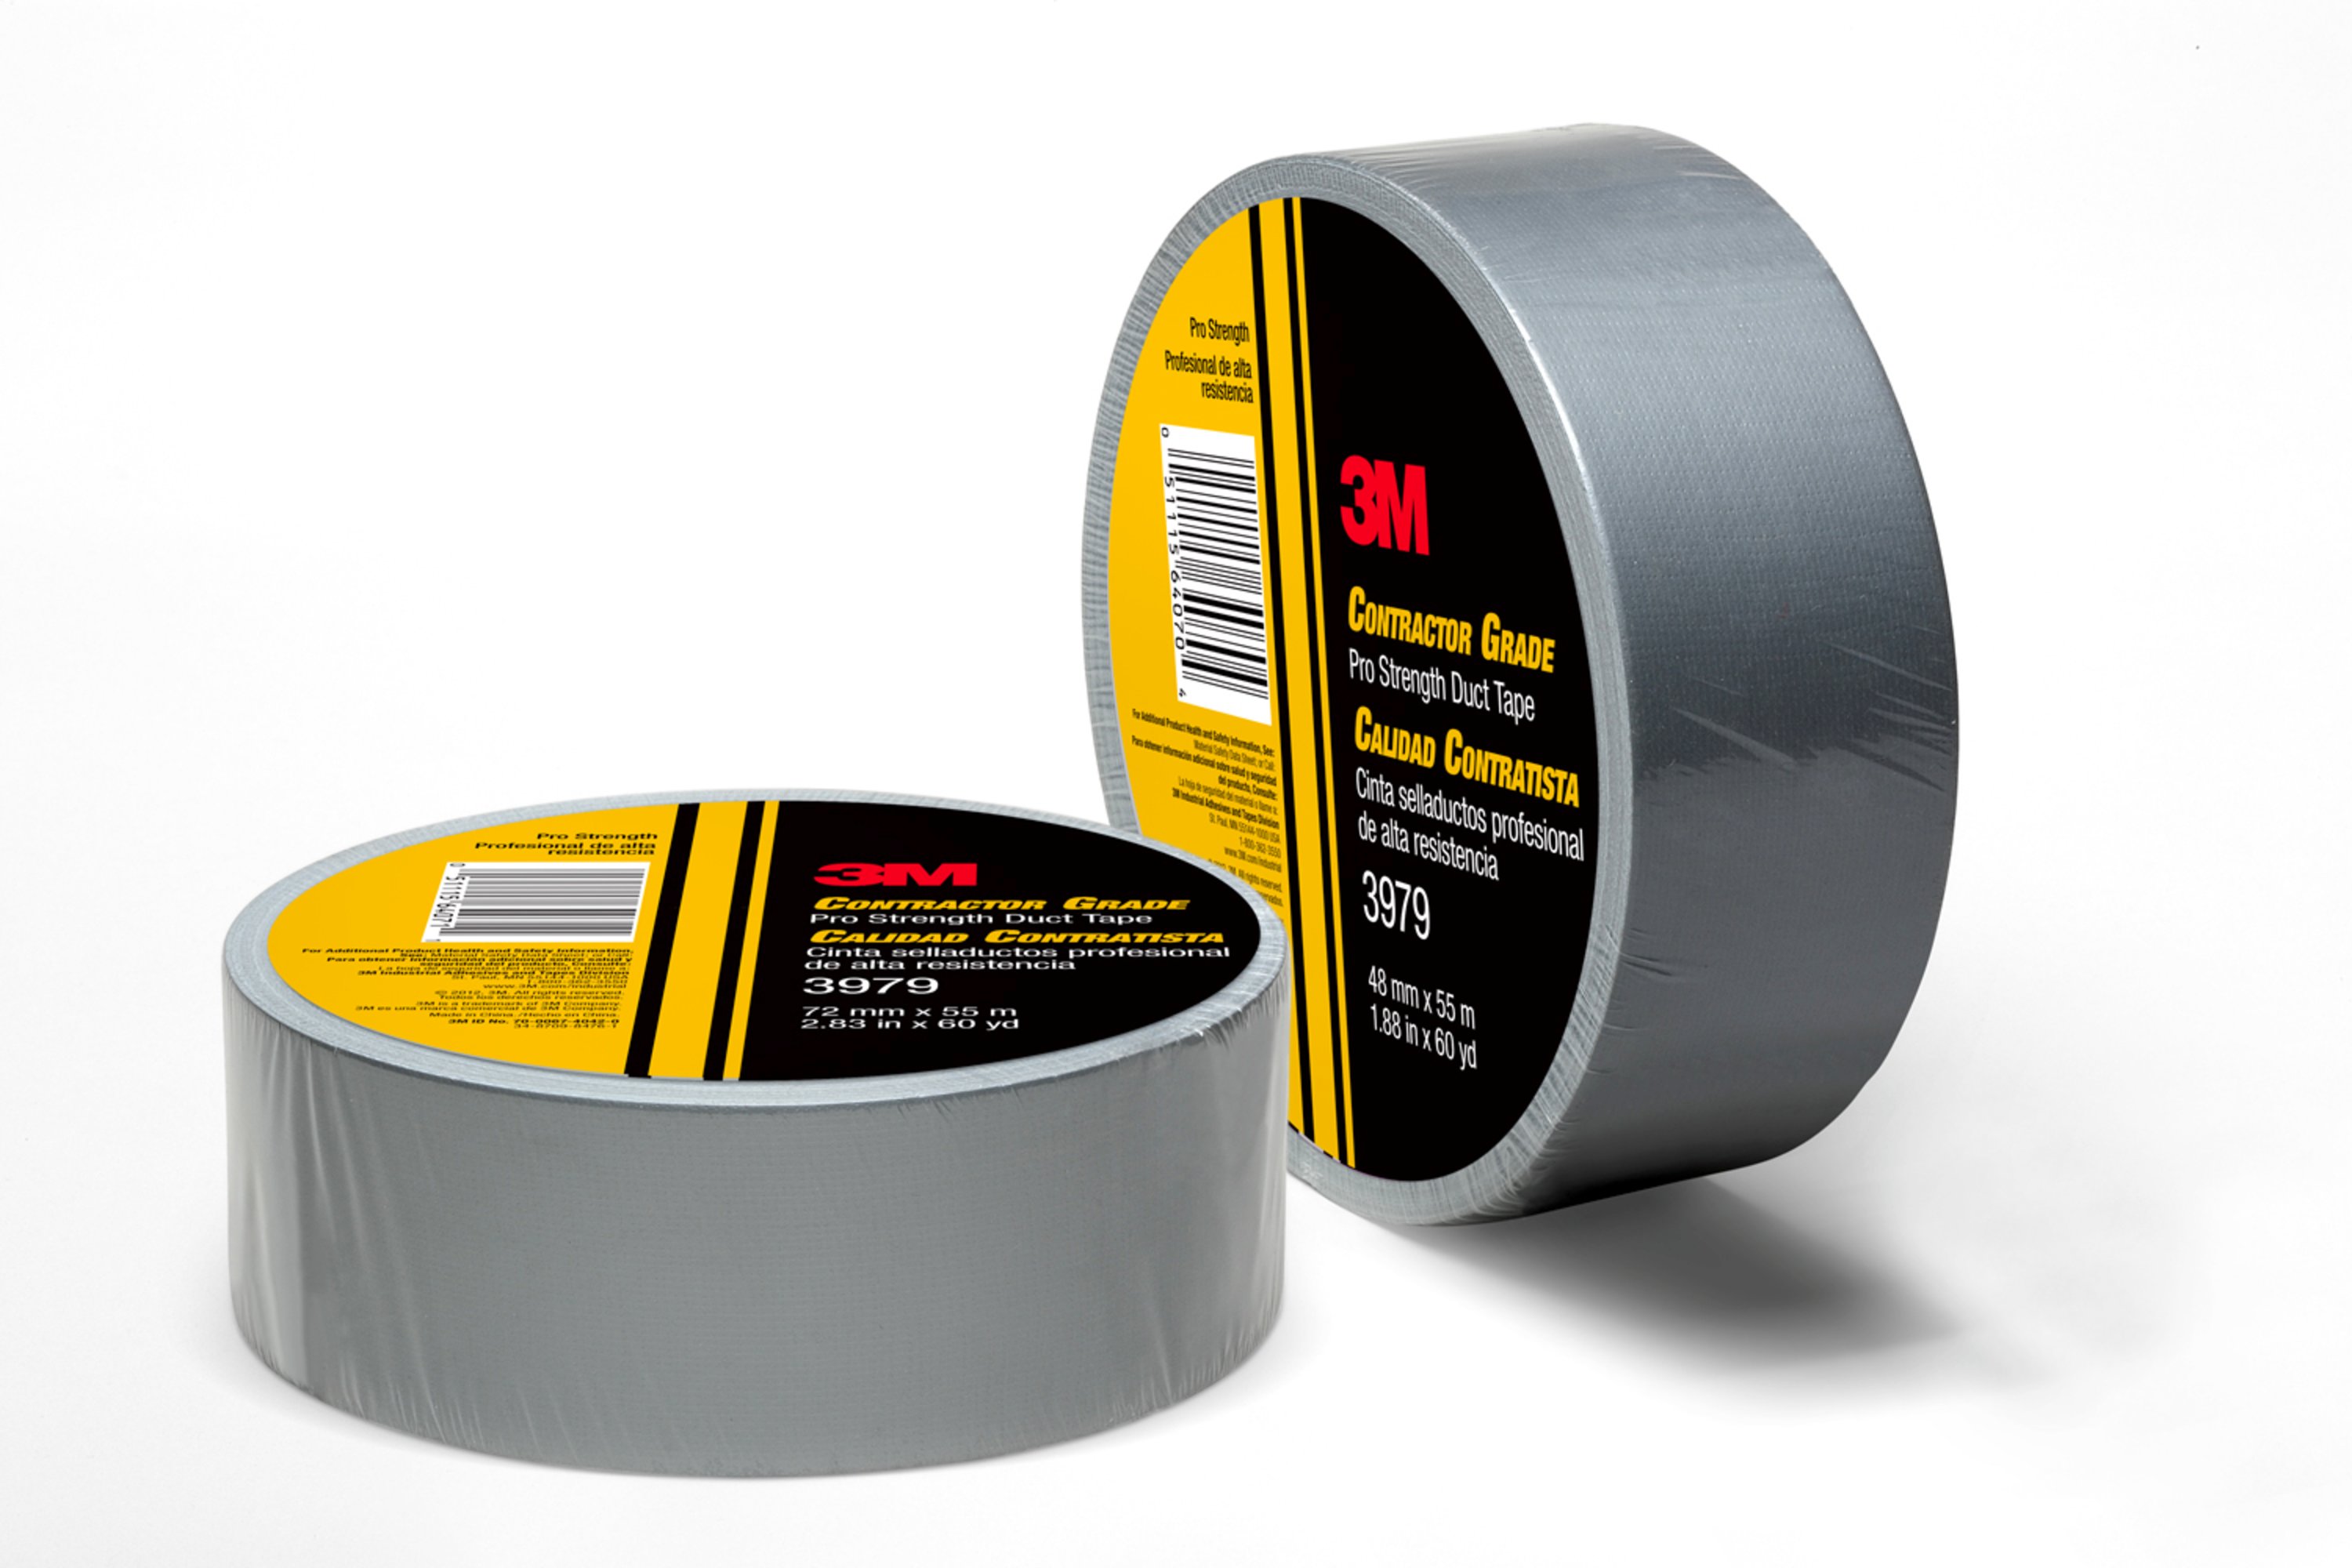 3M™ Contractor Grade Pro Strength Duct Tape 3979 can also be used at temperatures as high as 200°F for up to 30 minutes.